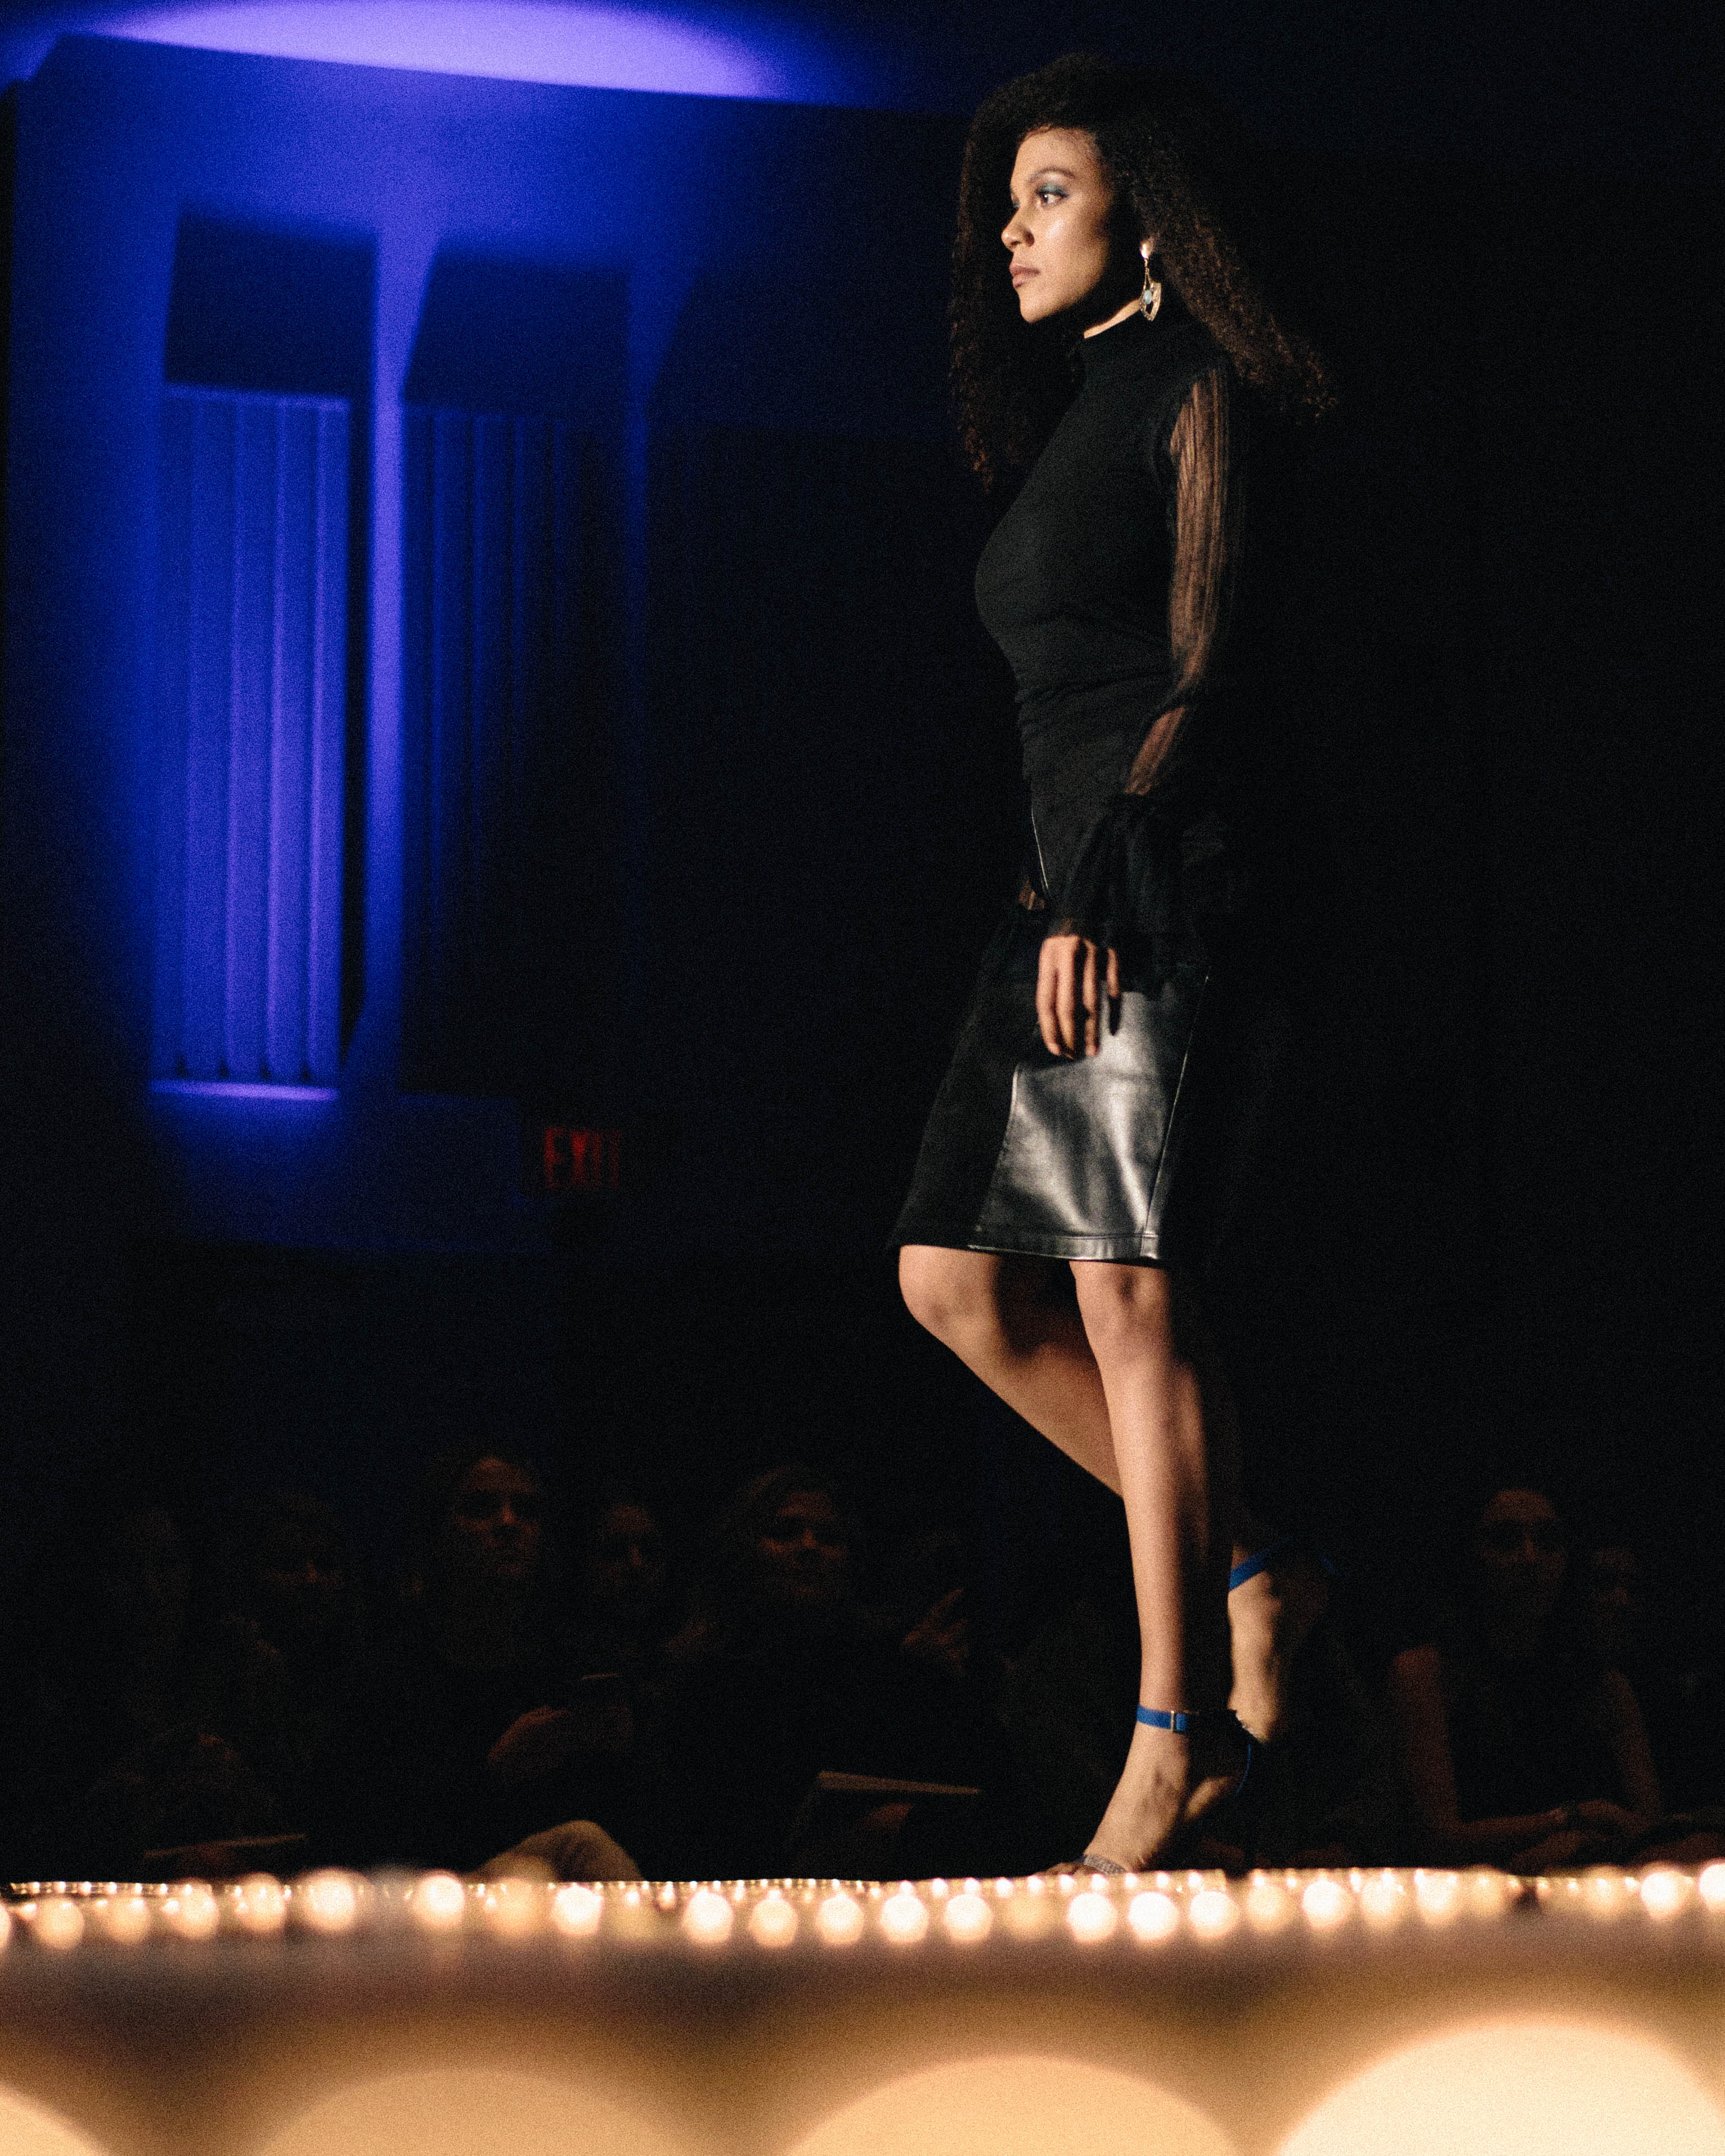 UDress Magazine reaches new heights with annual Fall Fashion Event